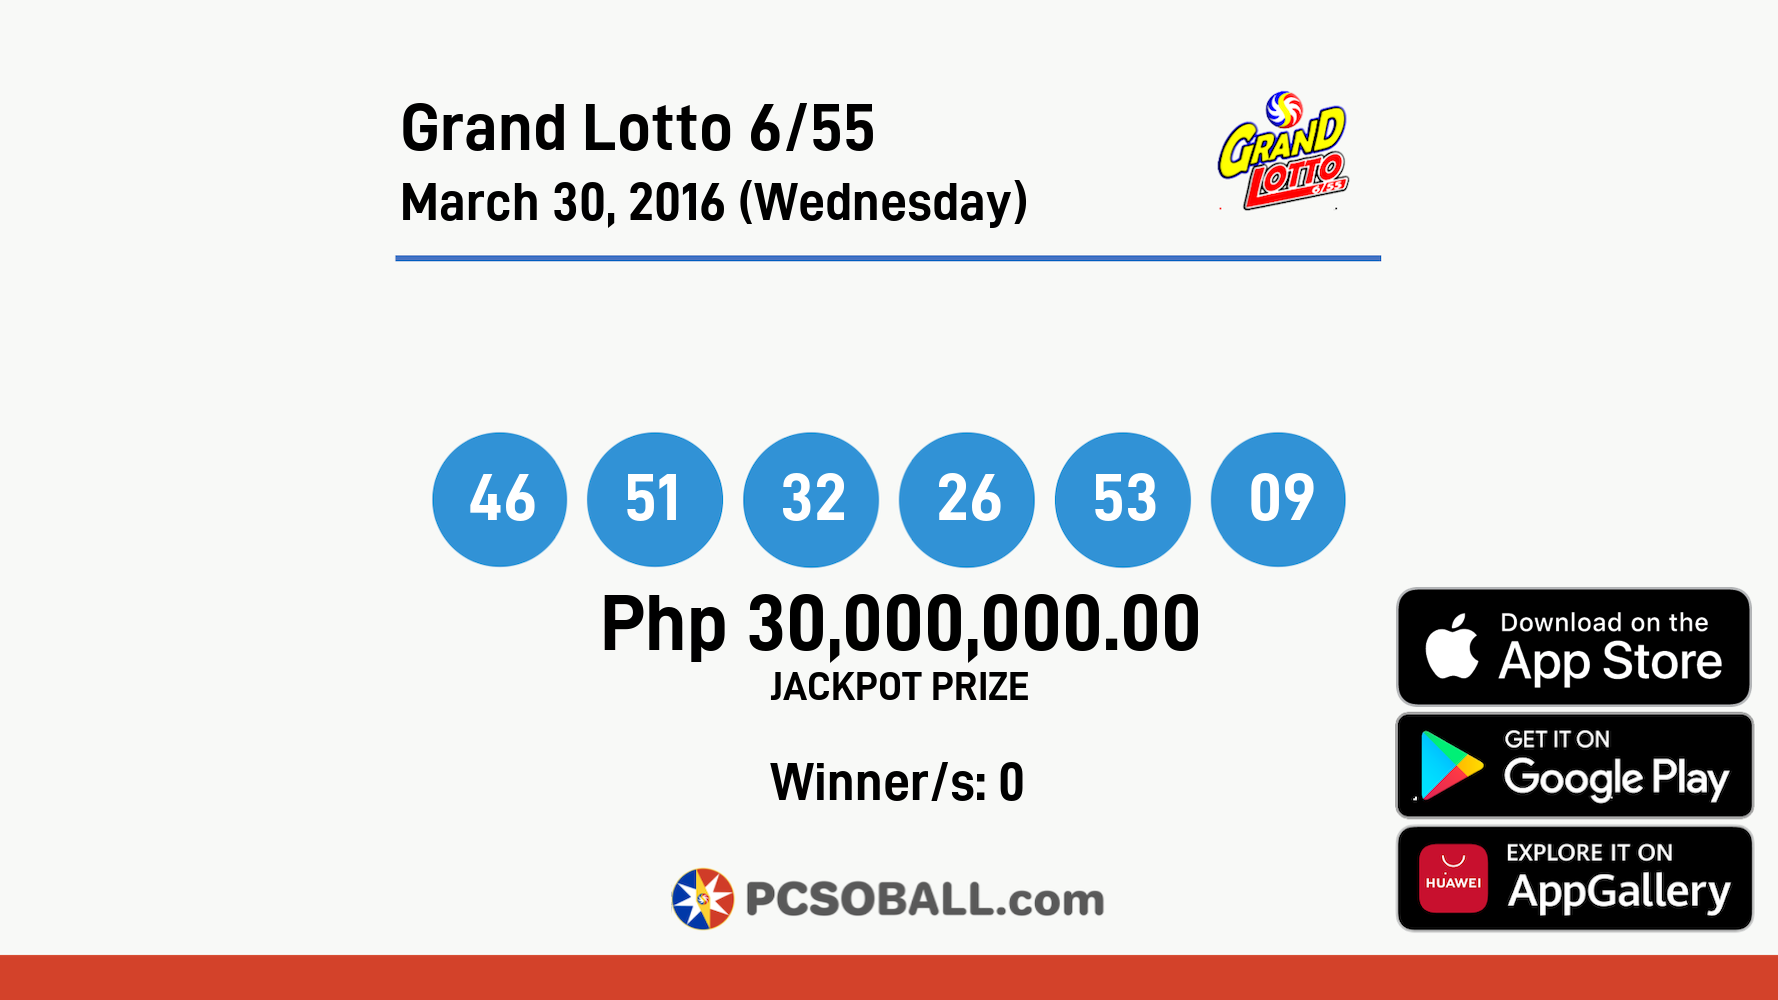 Grand Lotto 6/55 March 30, 2016 (Wednesday) Result